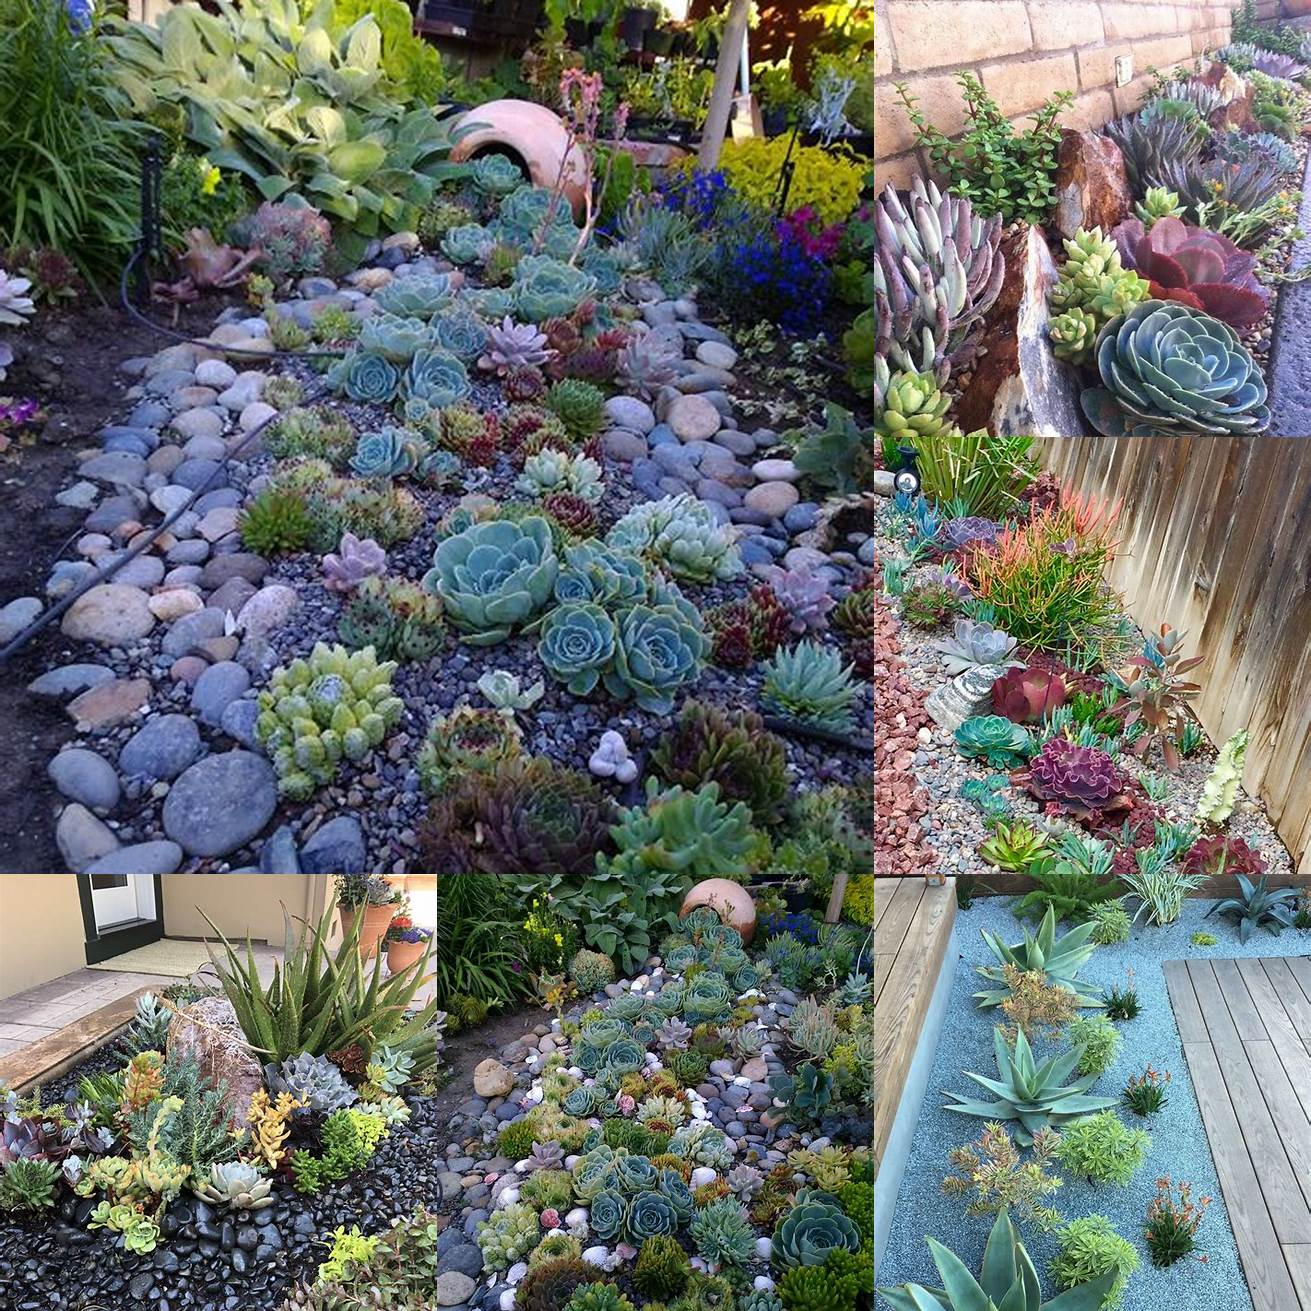 A succulent flower bed is a low-maintenance option that still looks beautiful